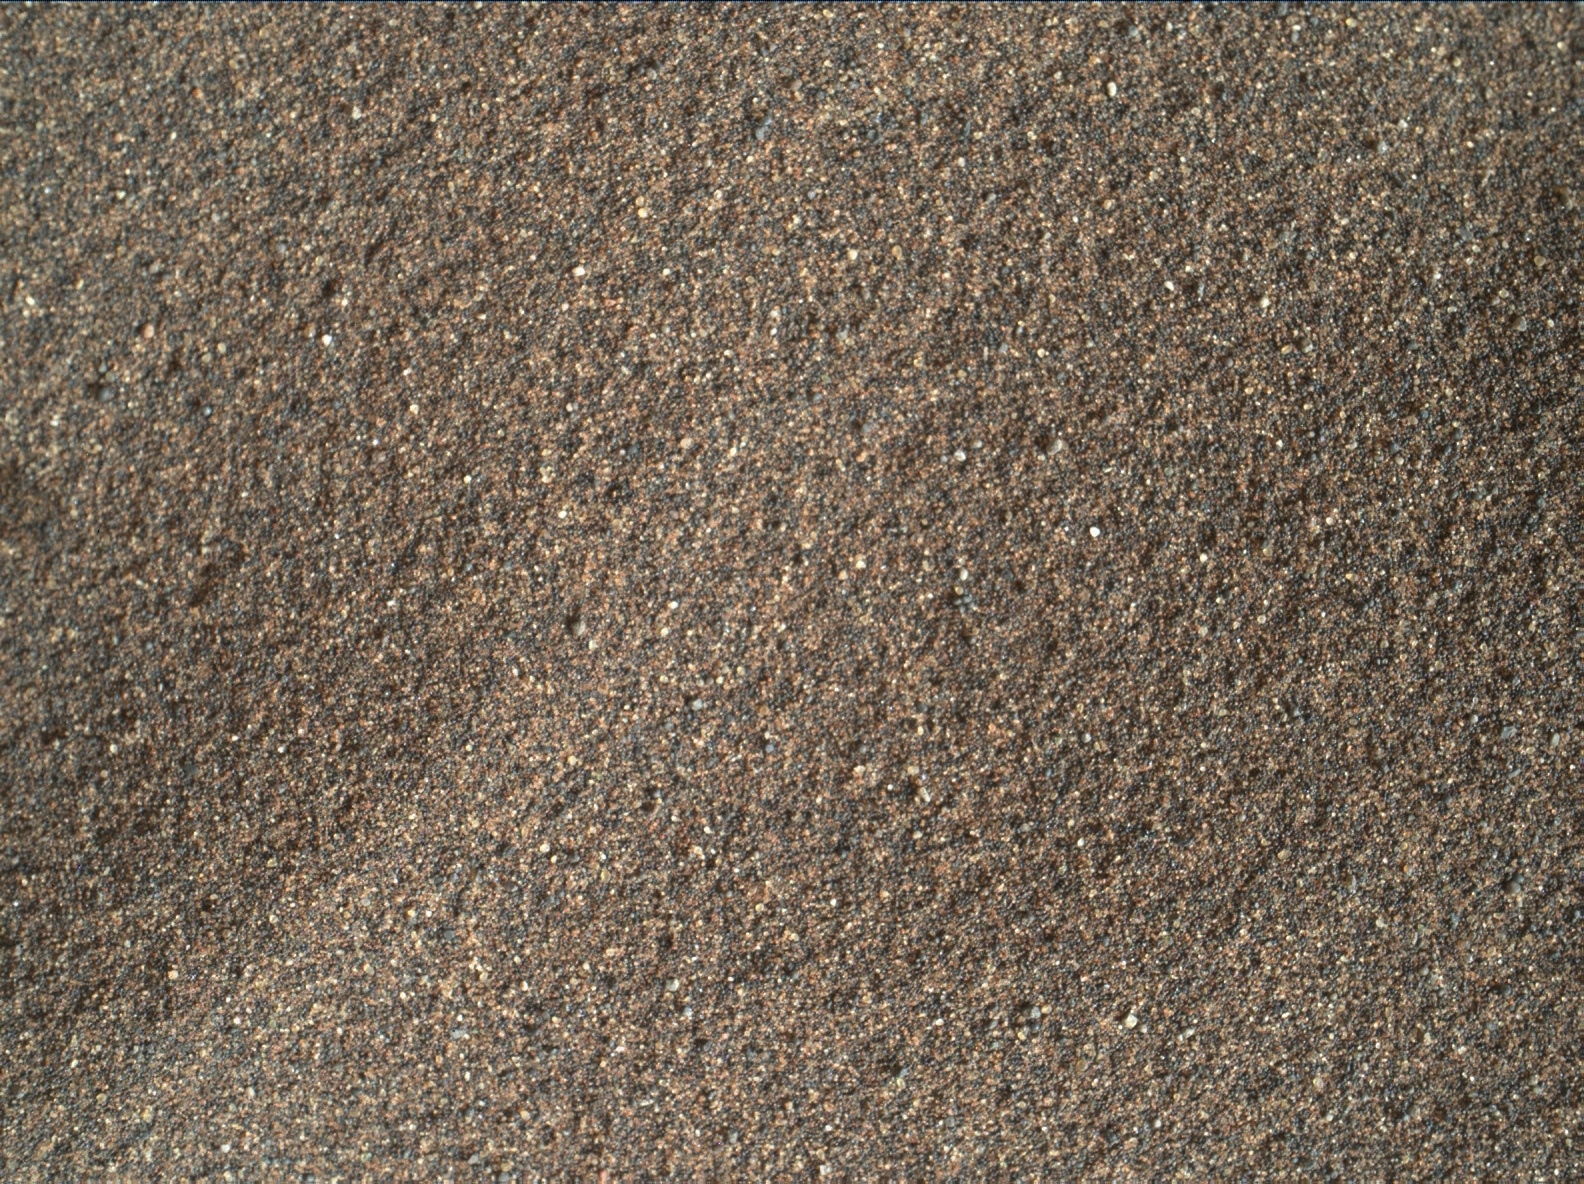 Nasa's Mars rover Curiosity acquired this image using its Mars Hand Lens Imager (MAHLI) on Sol 1618